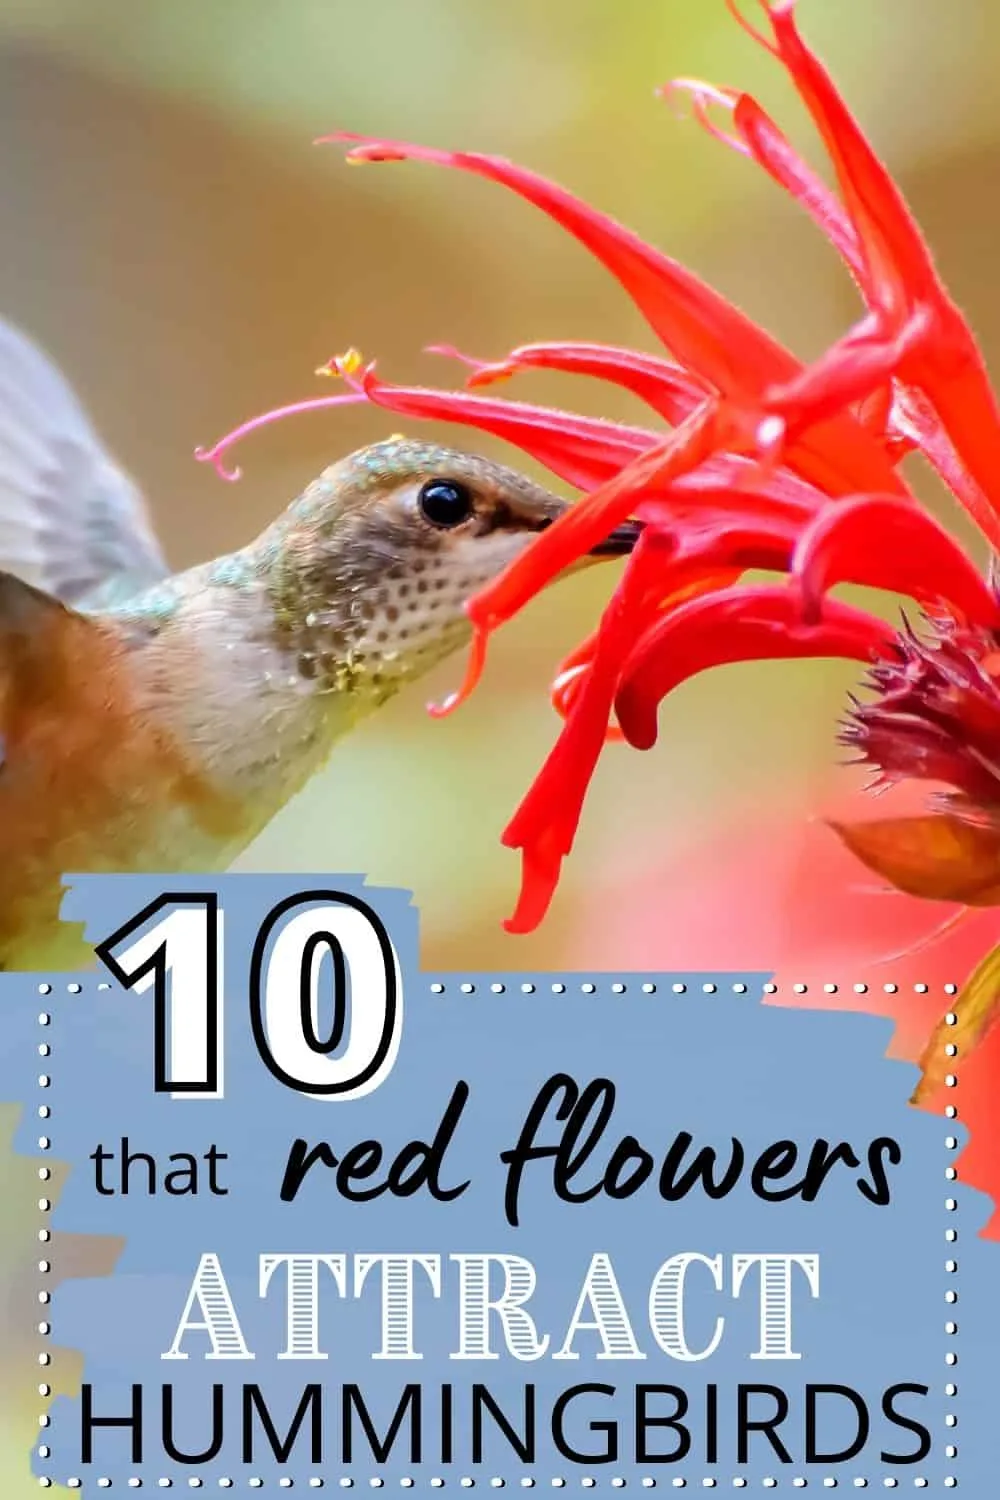 10 red flowers that attract hummingbirds to your garden